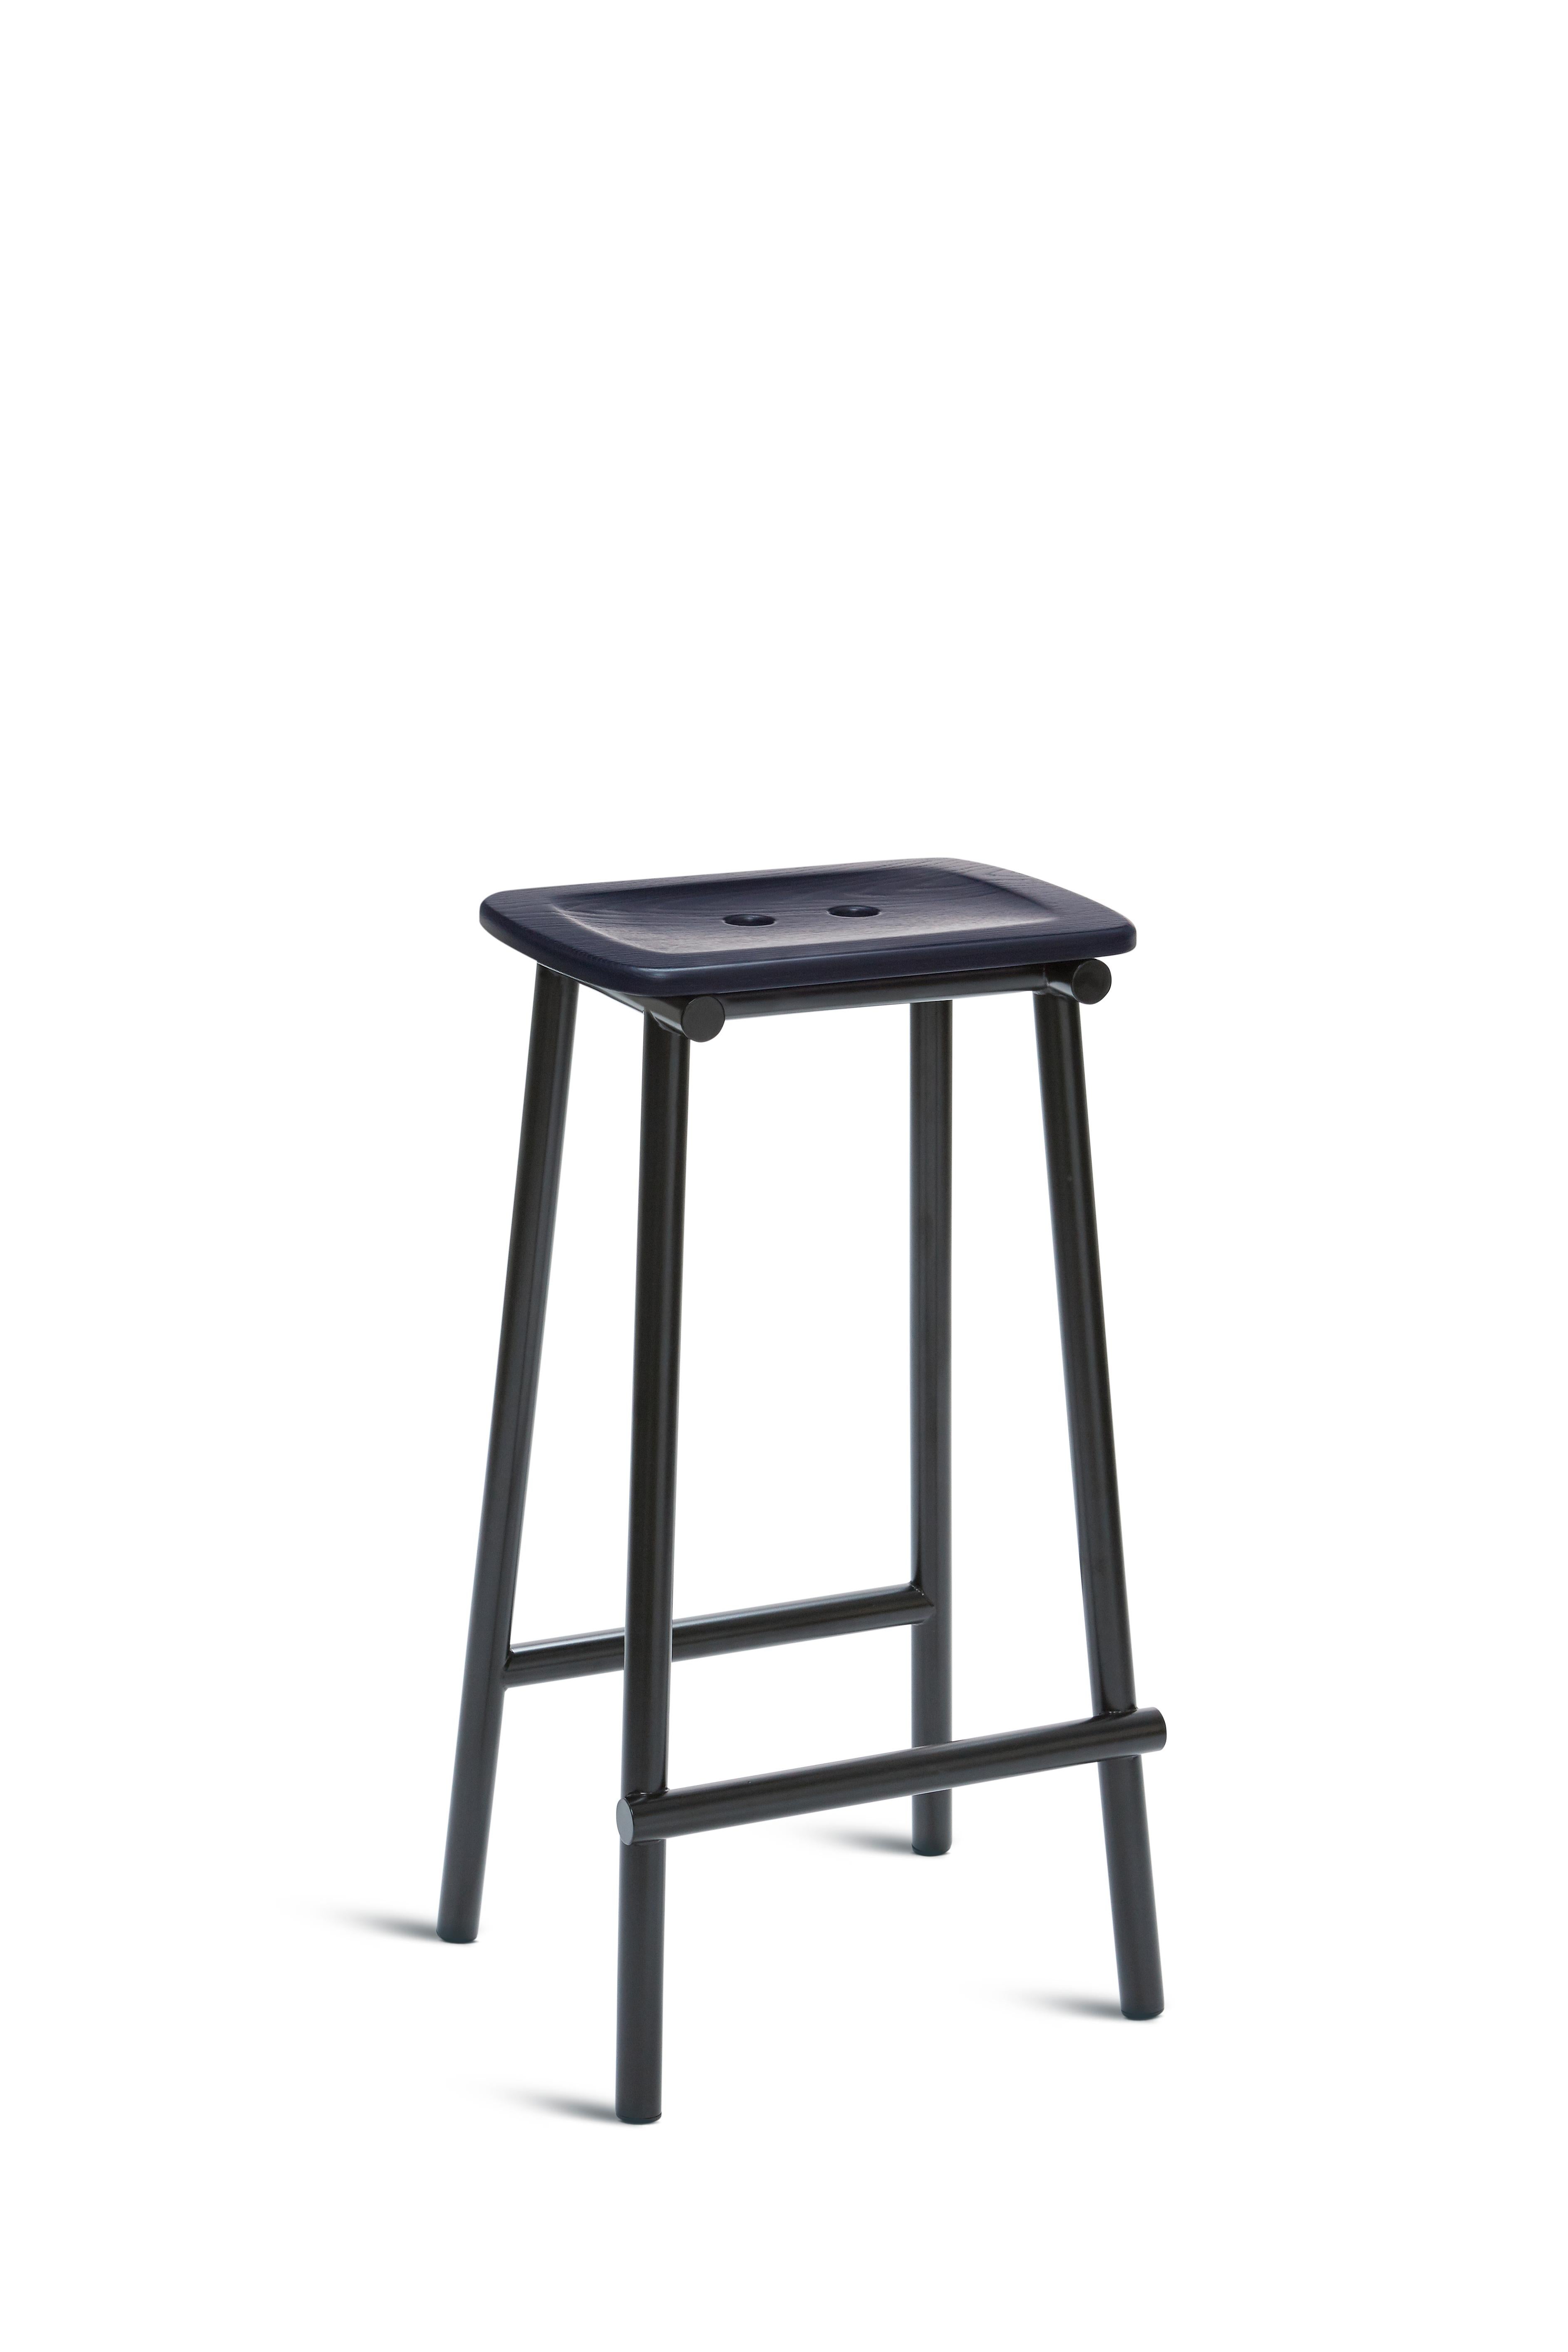 For Sale: Blue (Painted Navy Blue) Tubby Tube Bar Stool with Wooden Seat by Faye Toogood